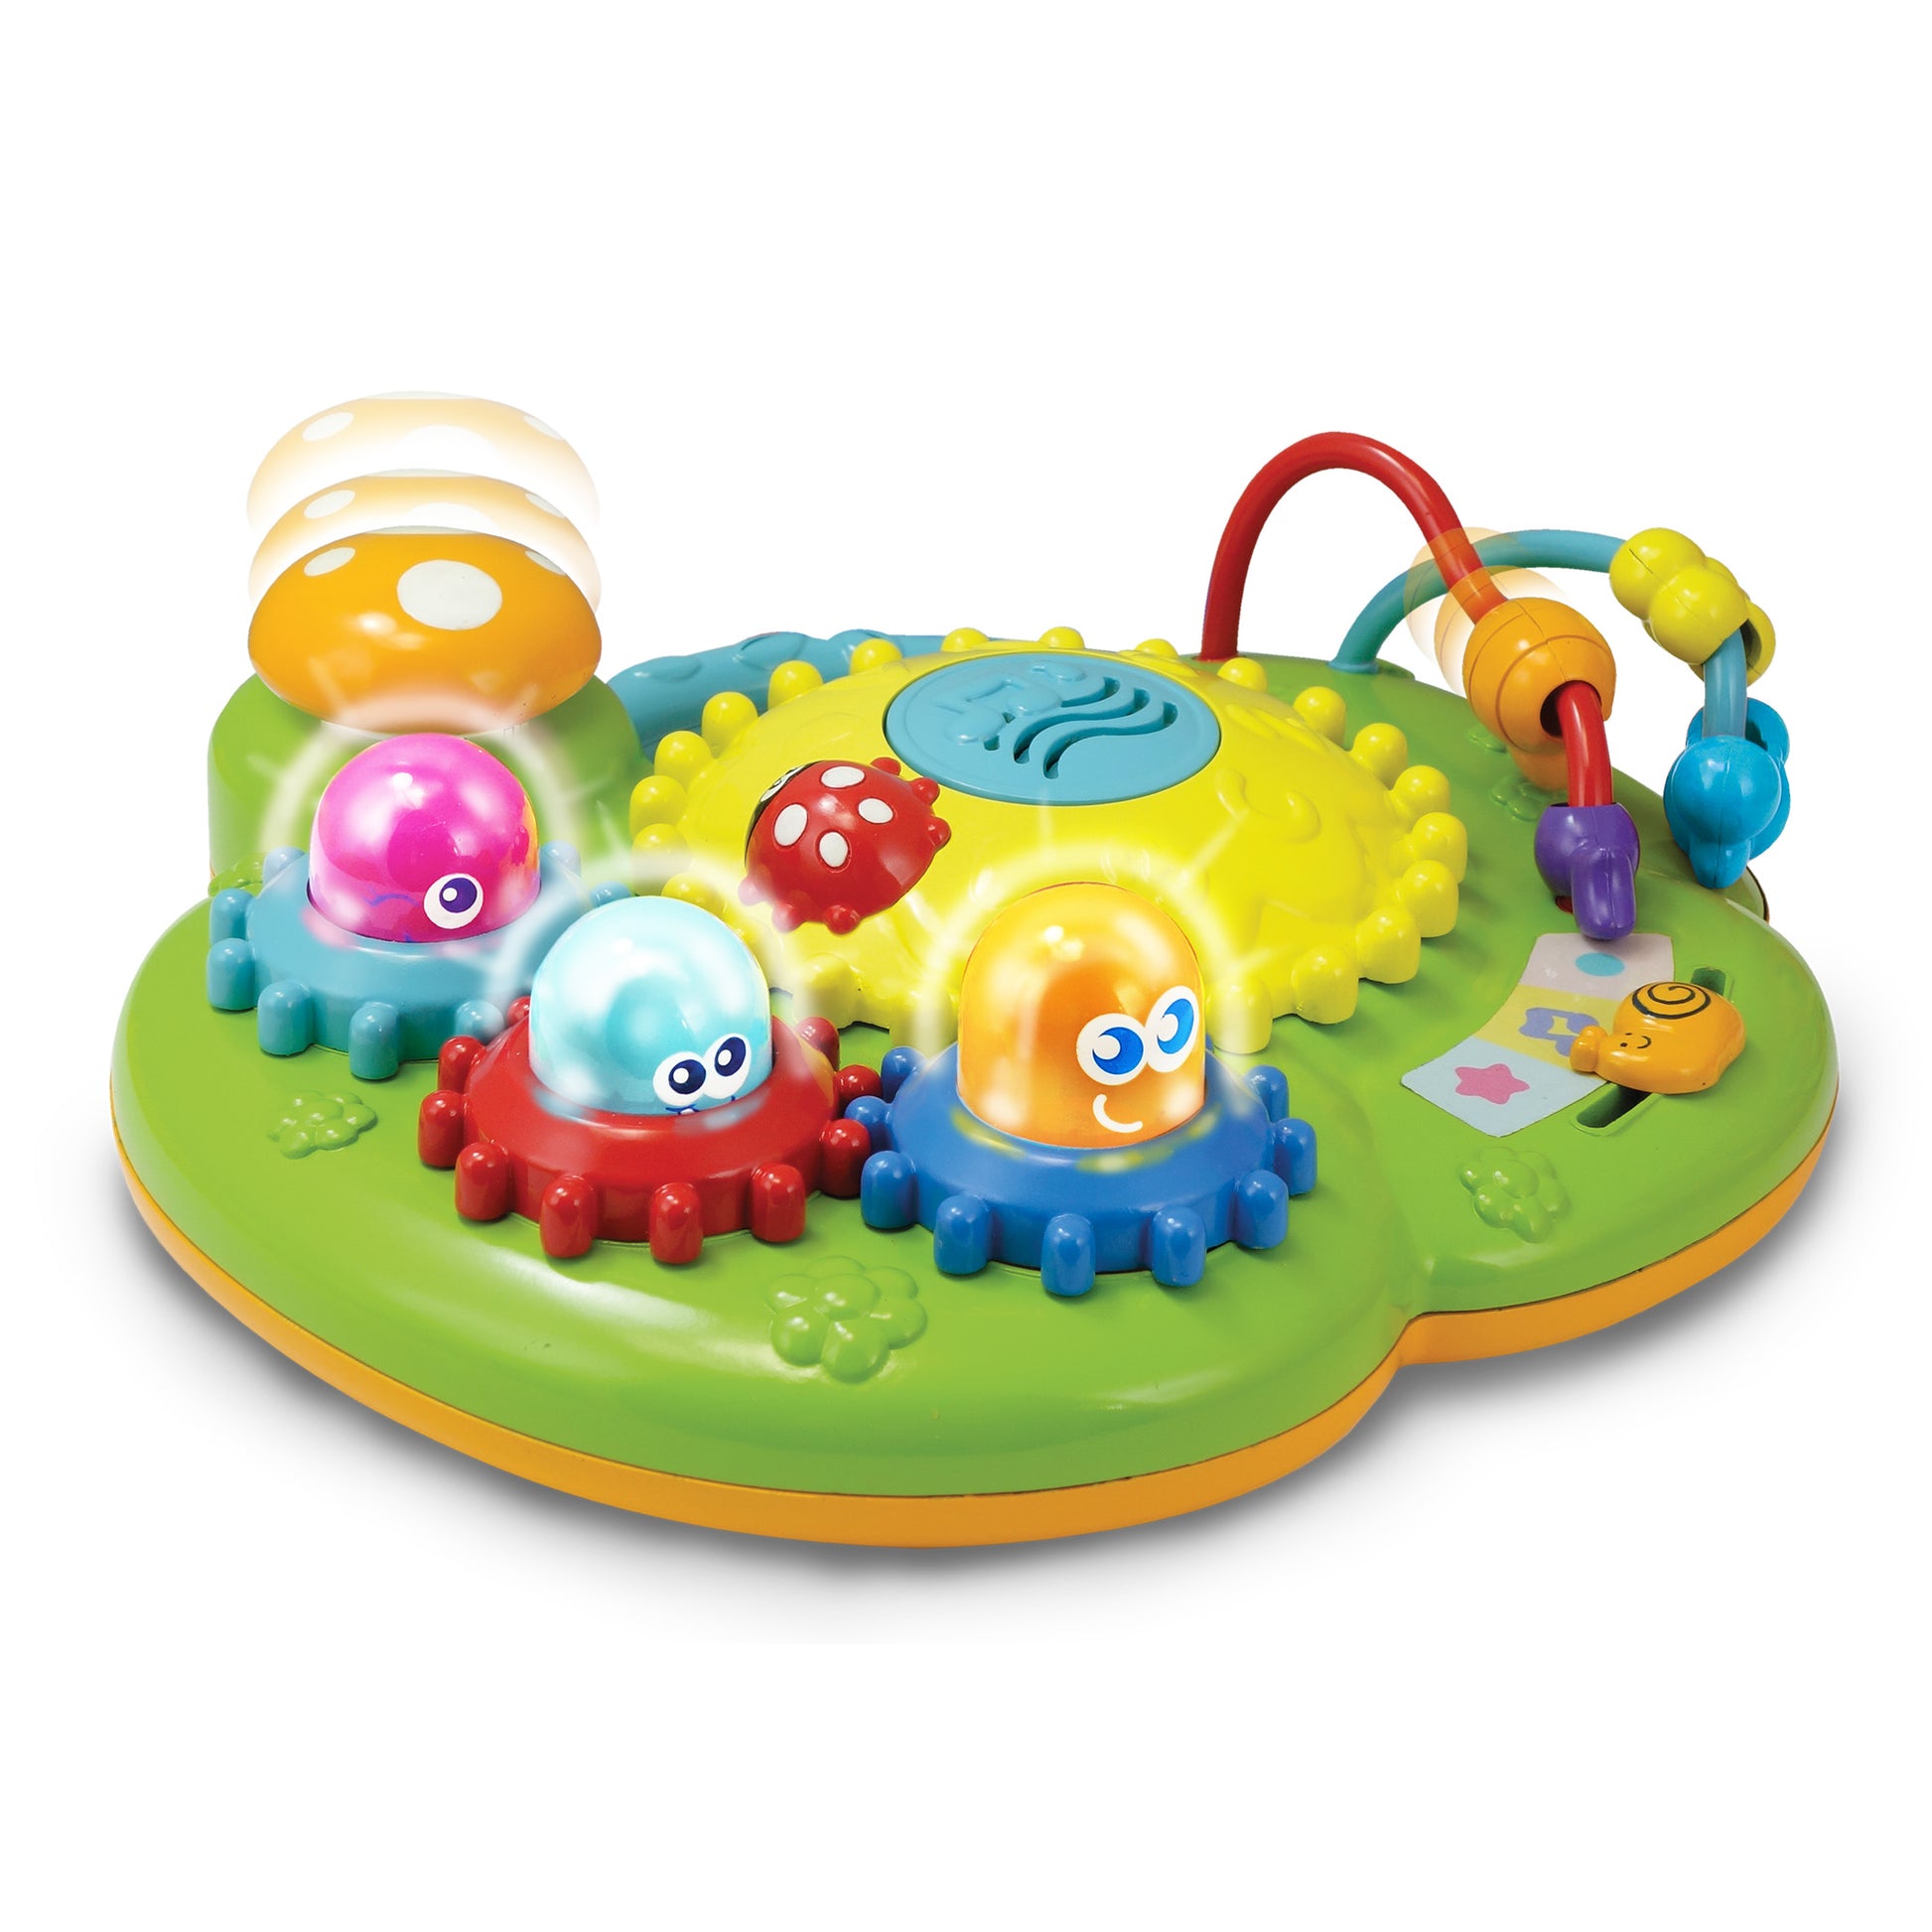 Sensory Play Toys, Discovery Playtime